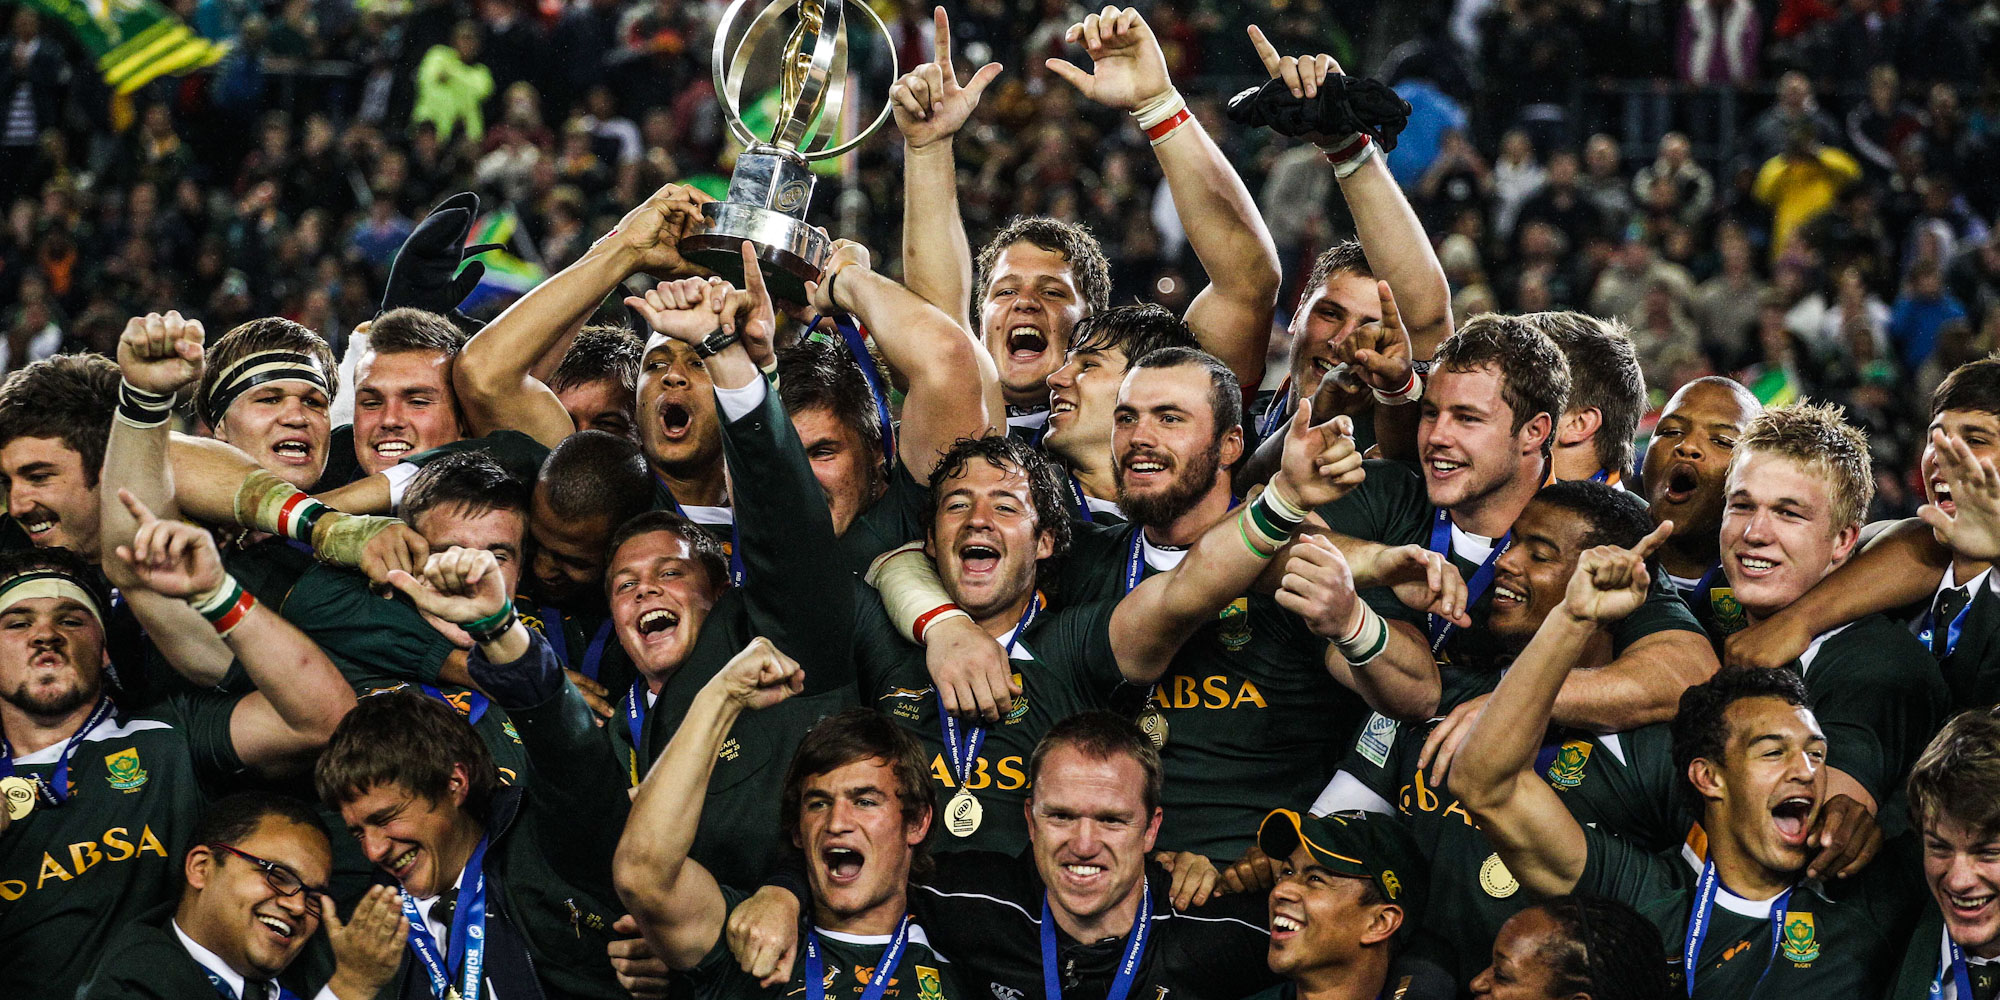 The Junior Boks won the World Rugby U20 Championship on home soil in 2012.